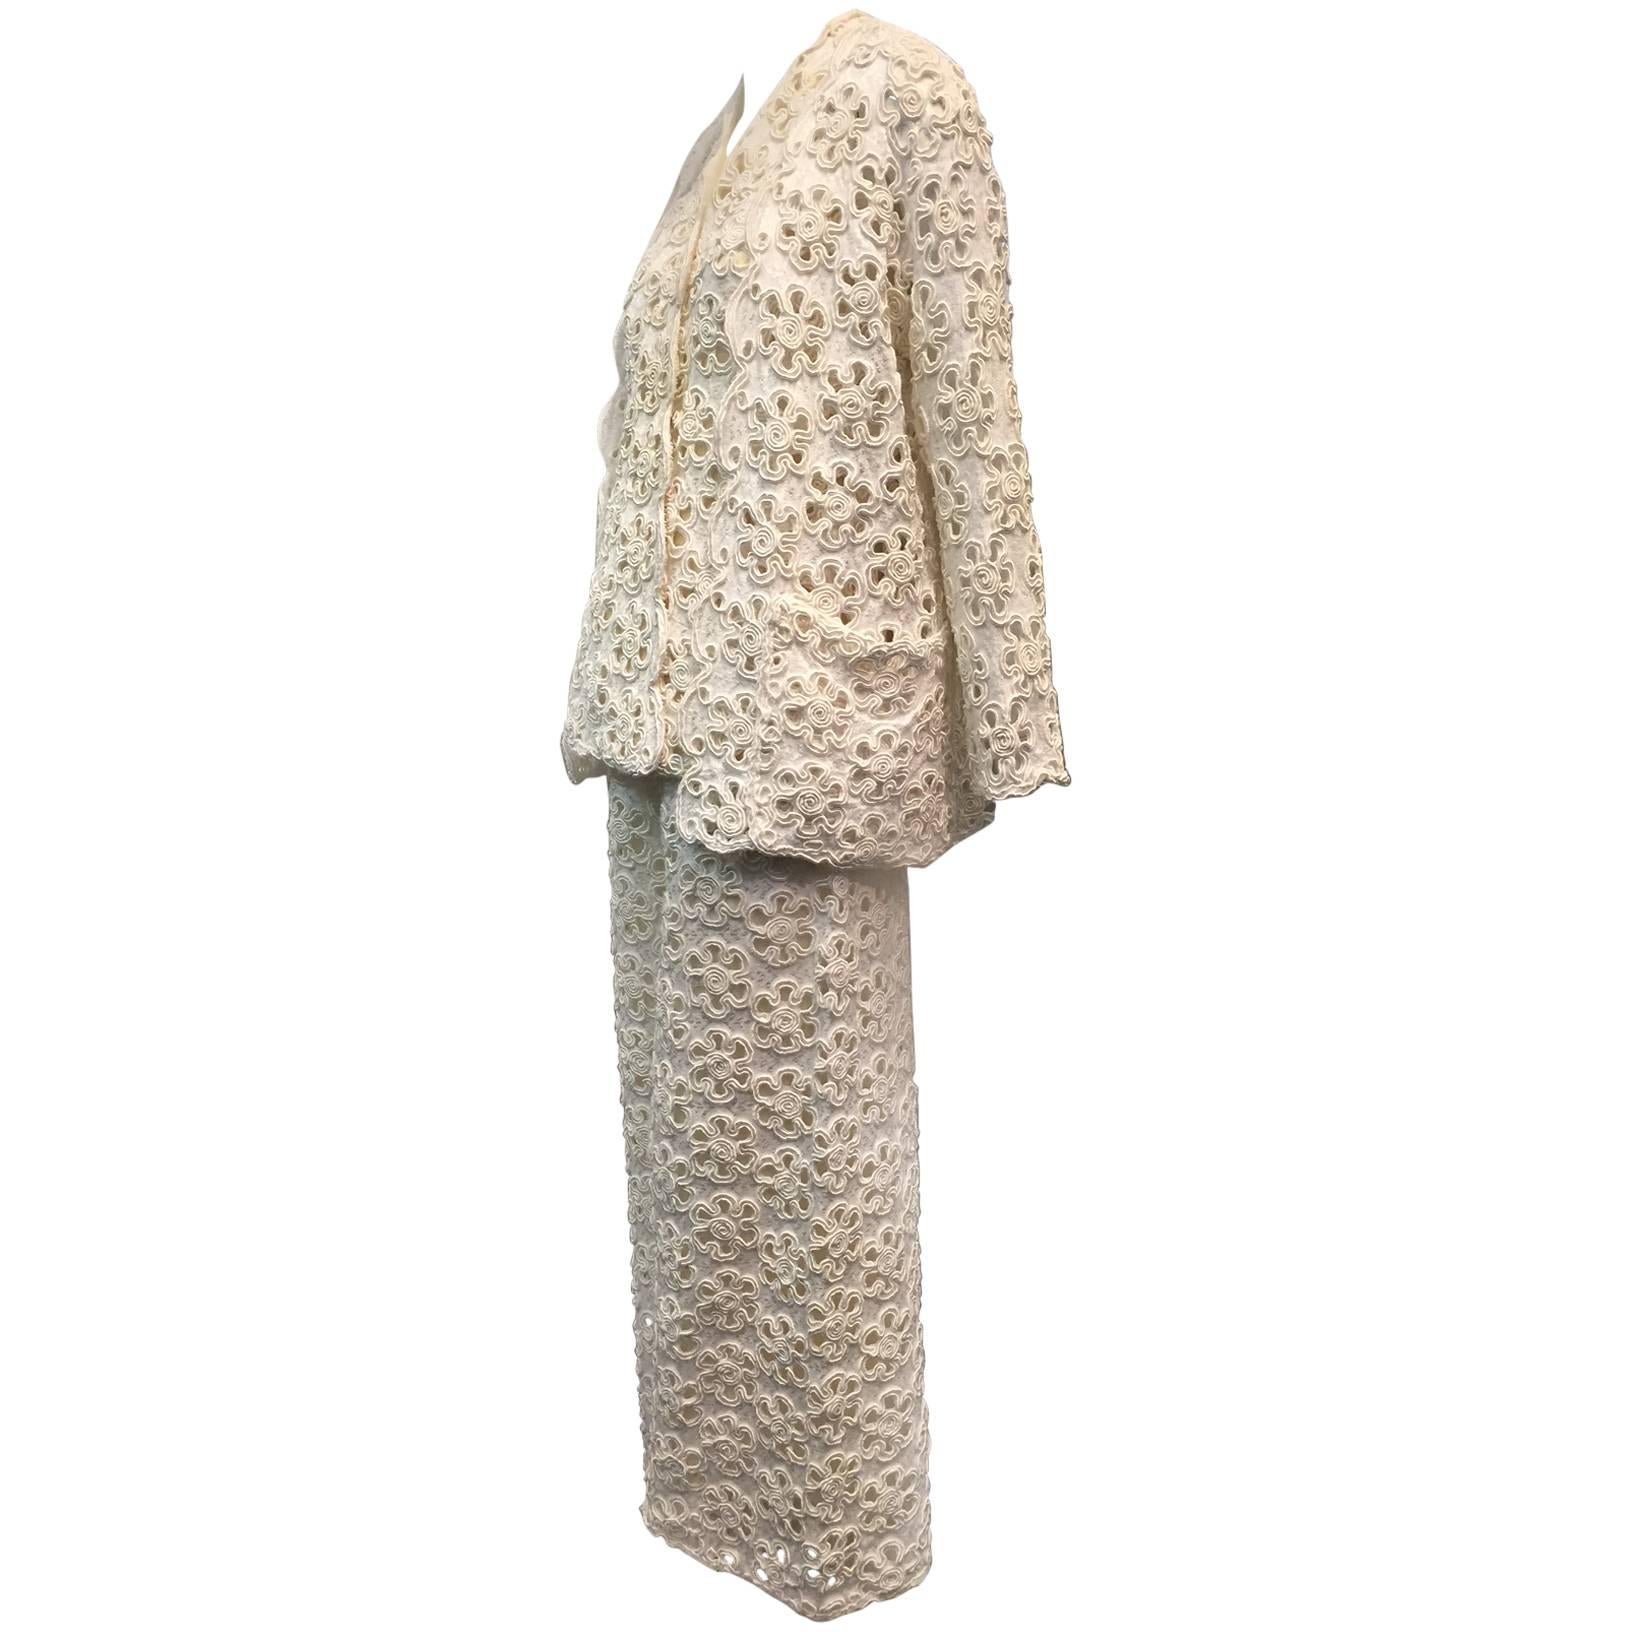 1960s James Galanos Mod Cream Embroidered Eyelet Lace 3-Piece Pant Suit For Sale